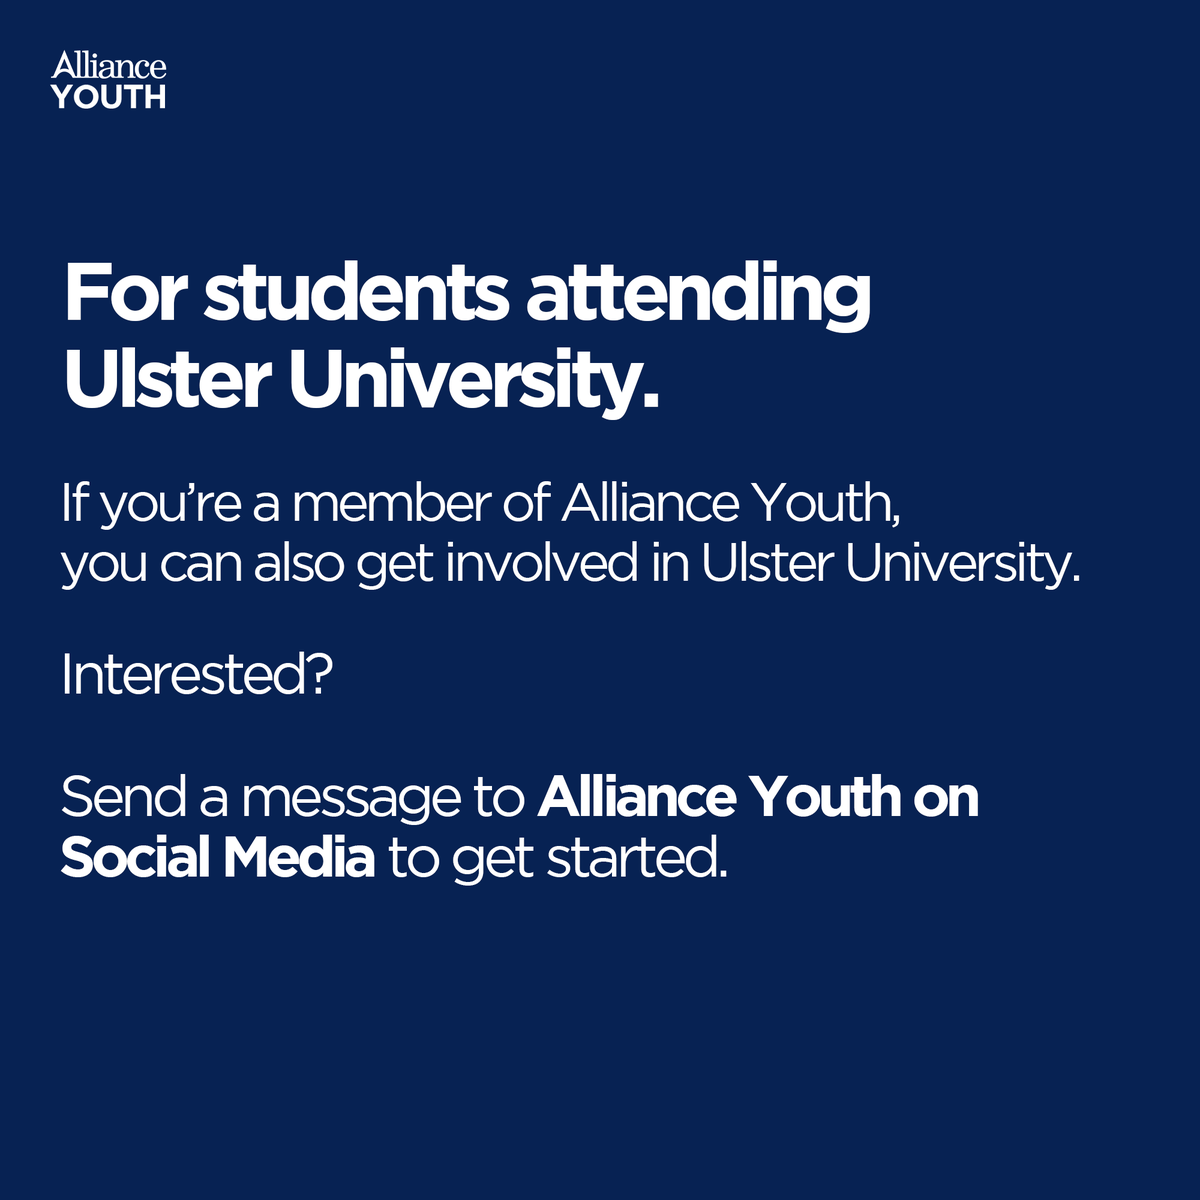 For students attending @UlsterUni By joining Alliance, you can get involved through our students society in Ulster University. Interested? Give us a message today 📨